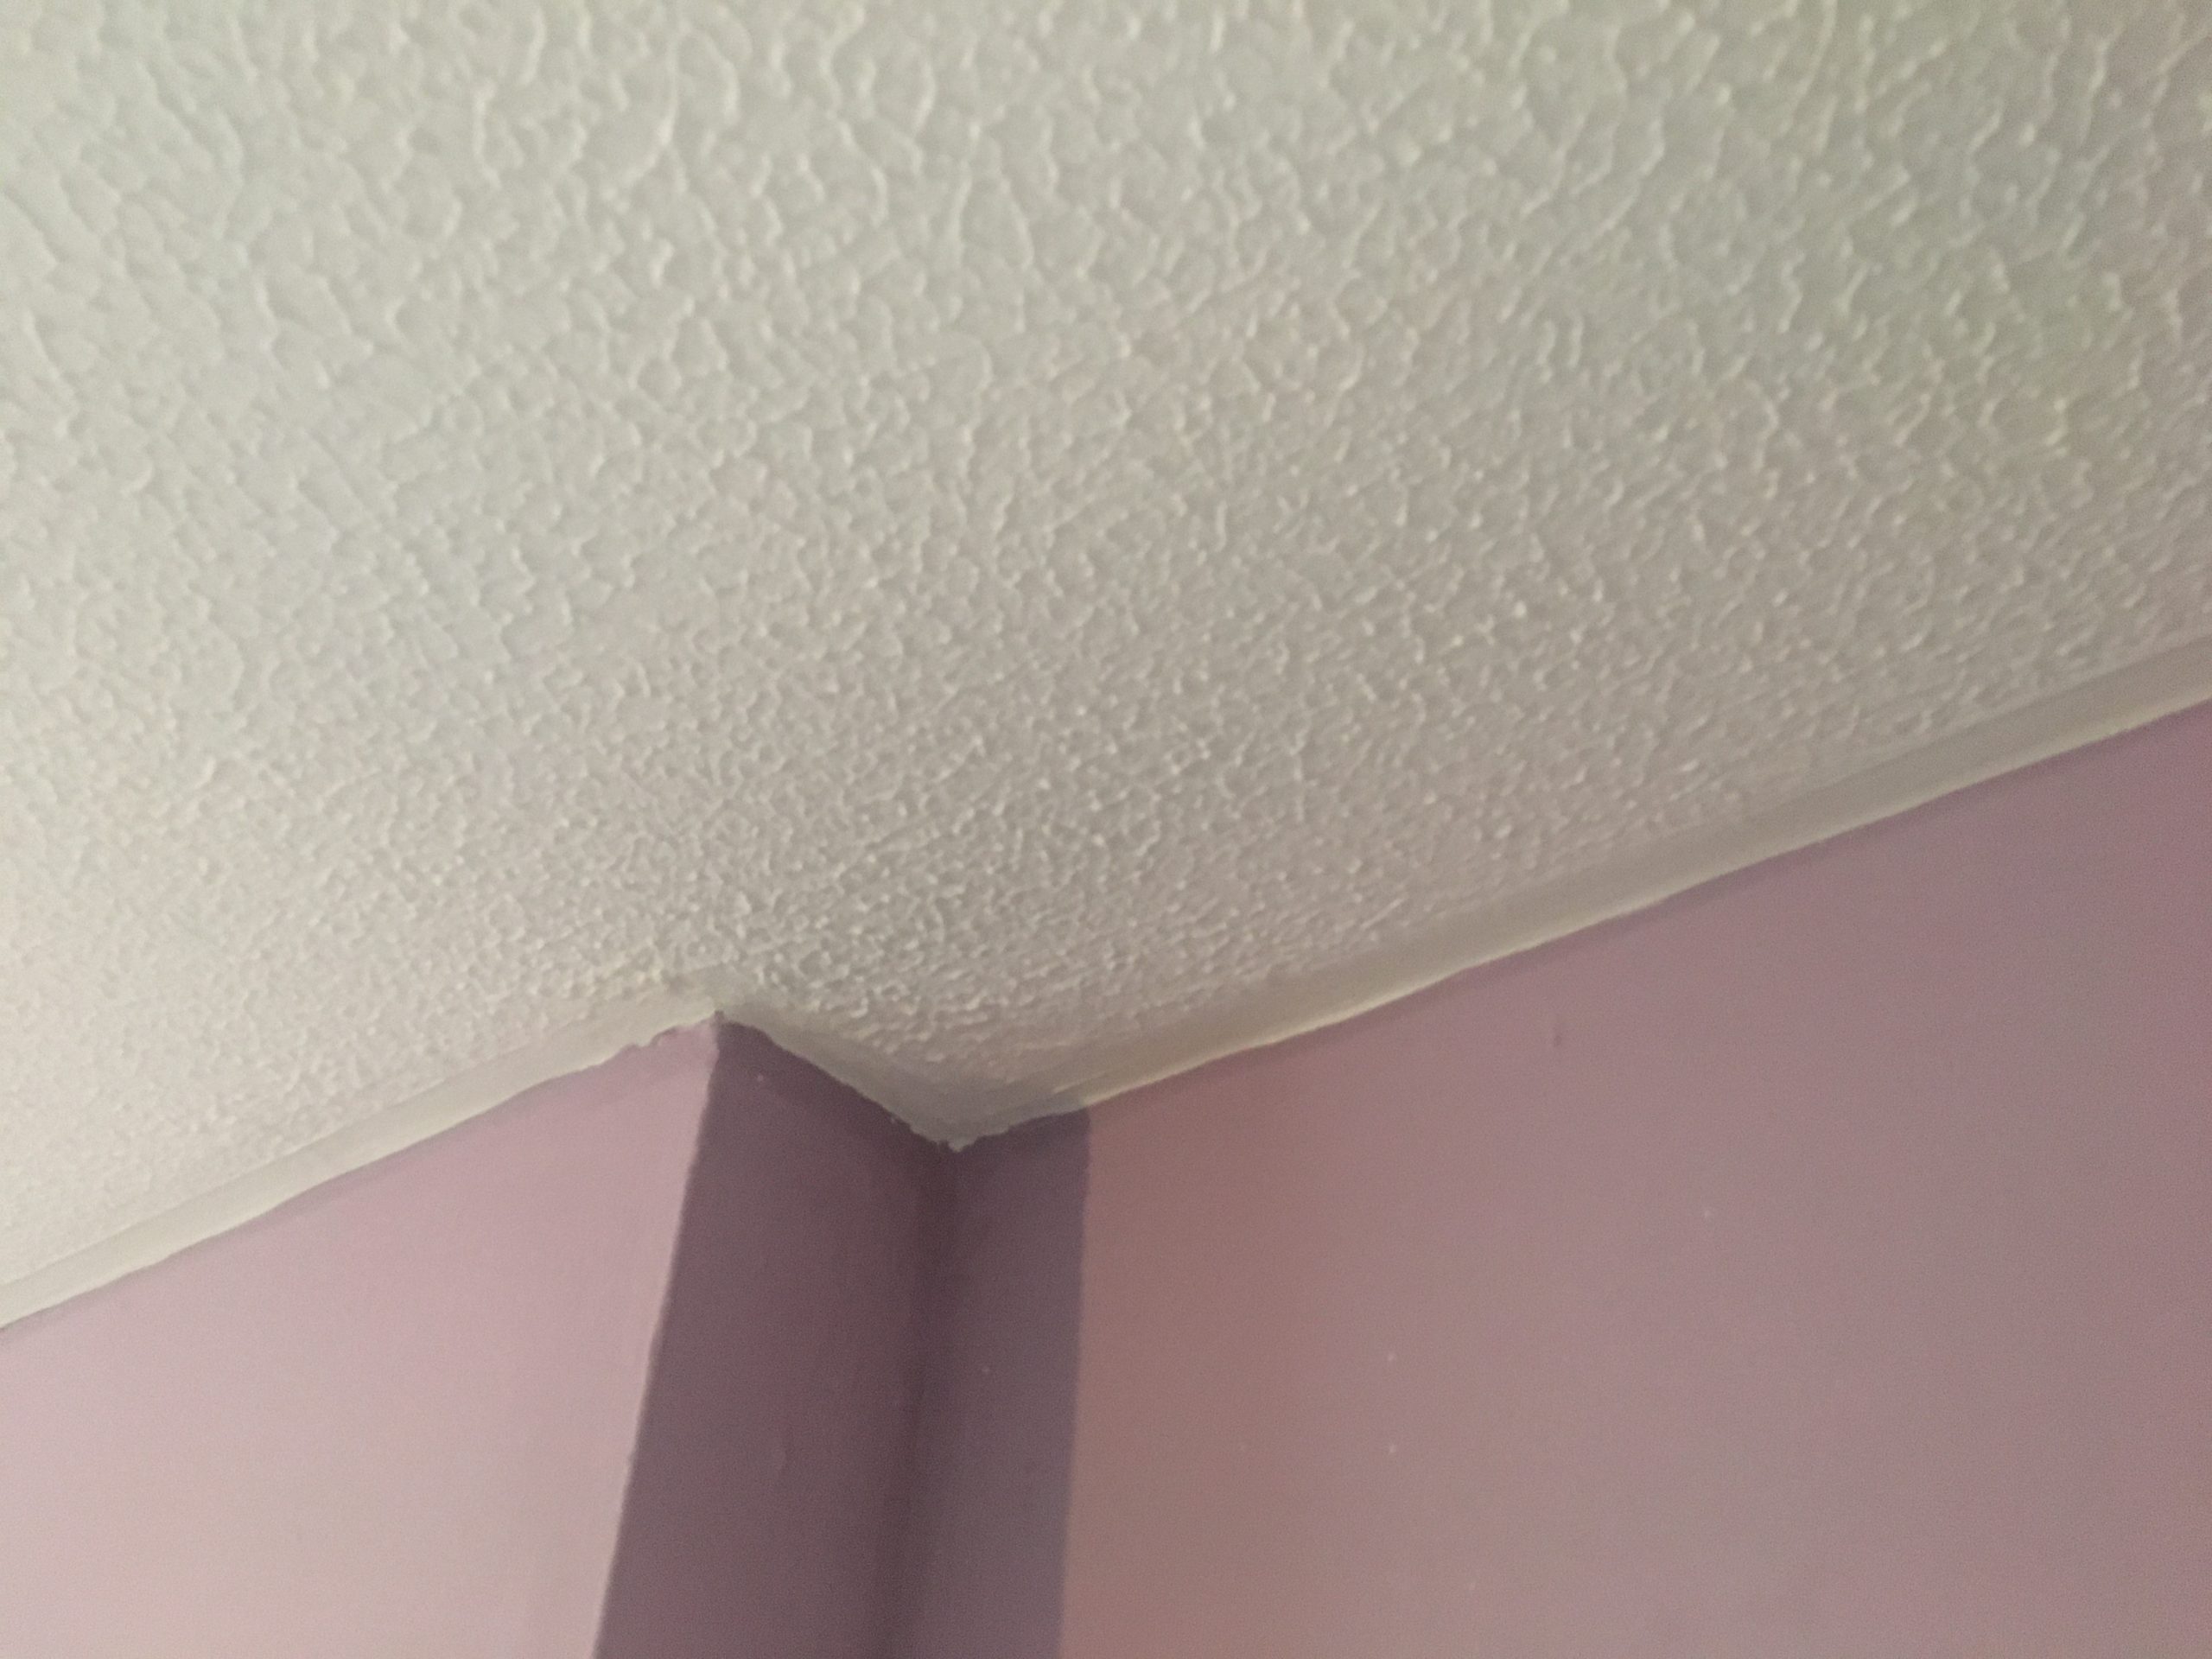 Textured / artex ceilings which may contain asbestos.